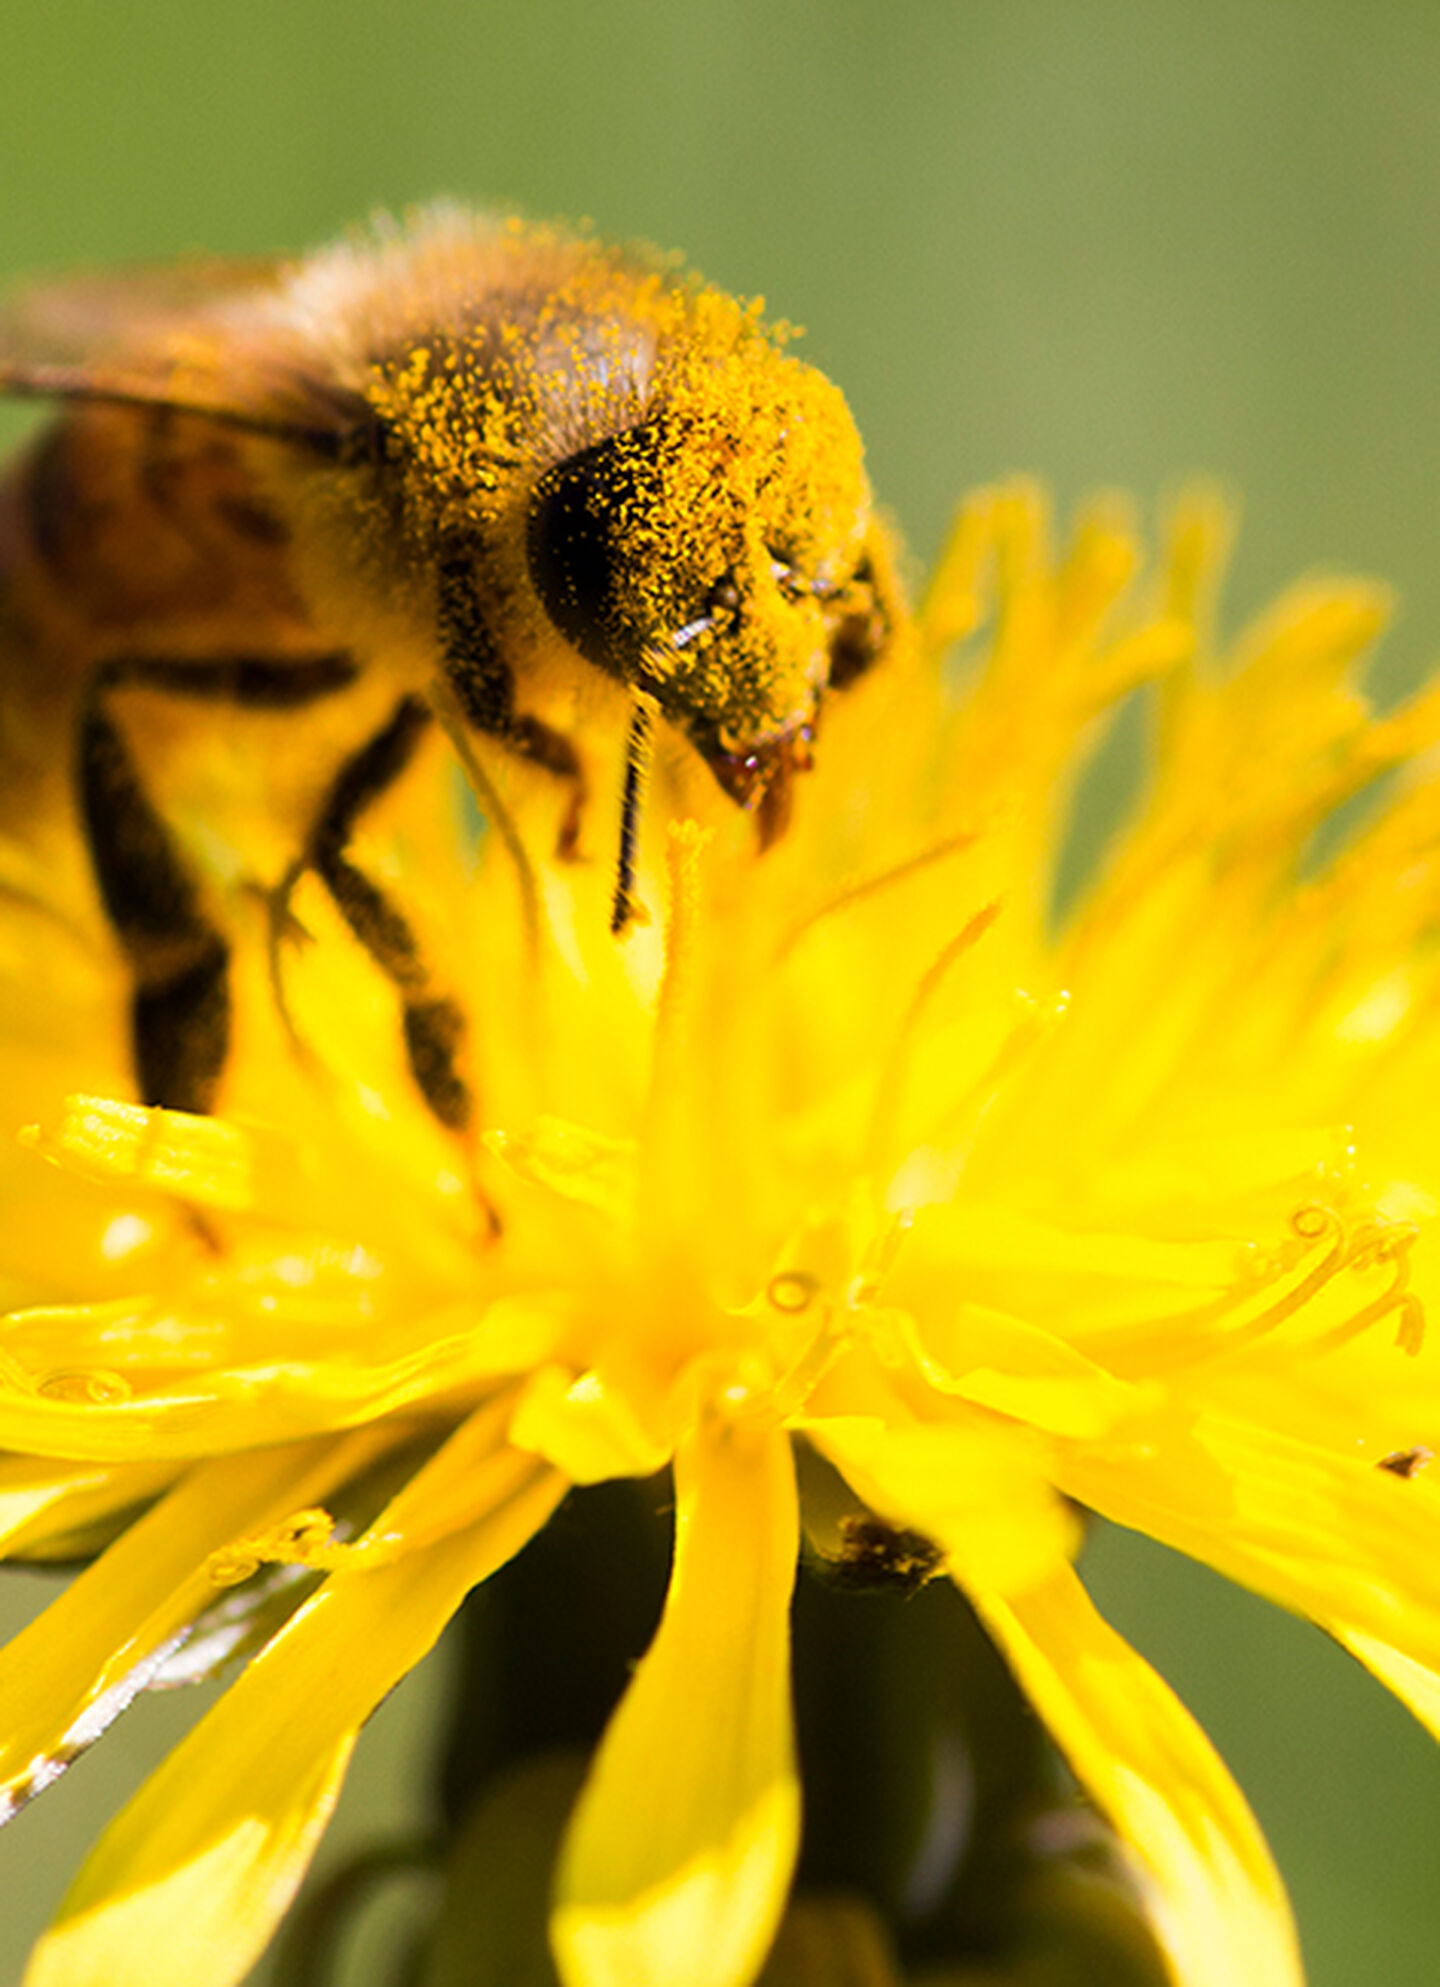 A macro image of a bee covered in pollen sitting on a yellow flower